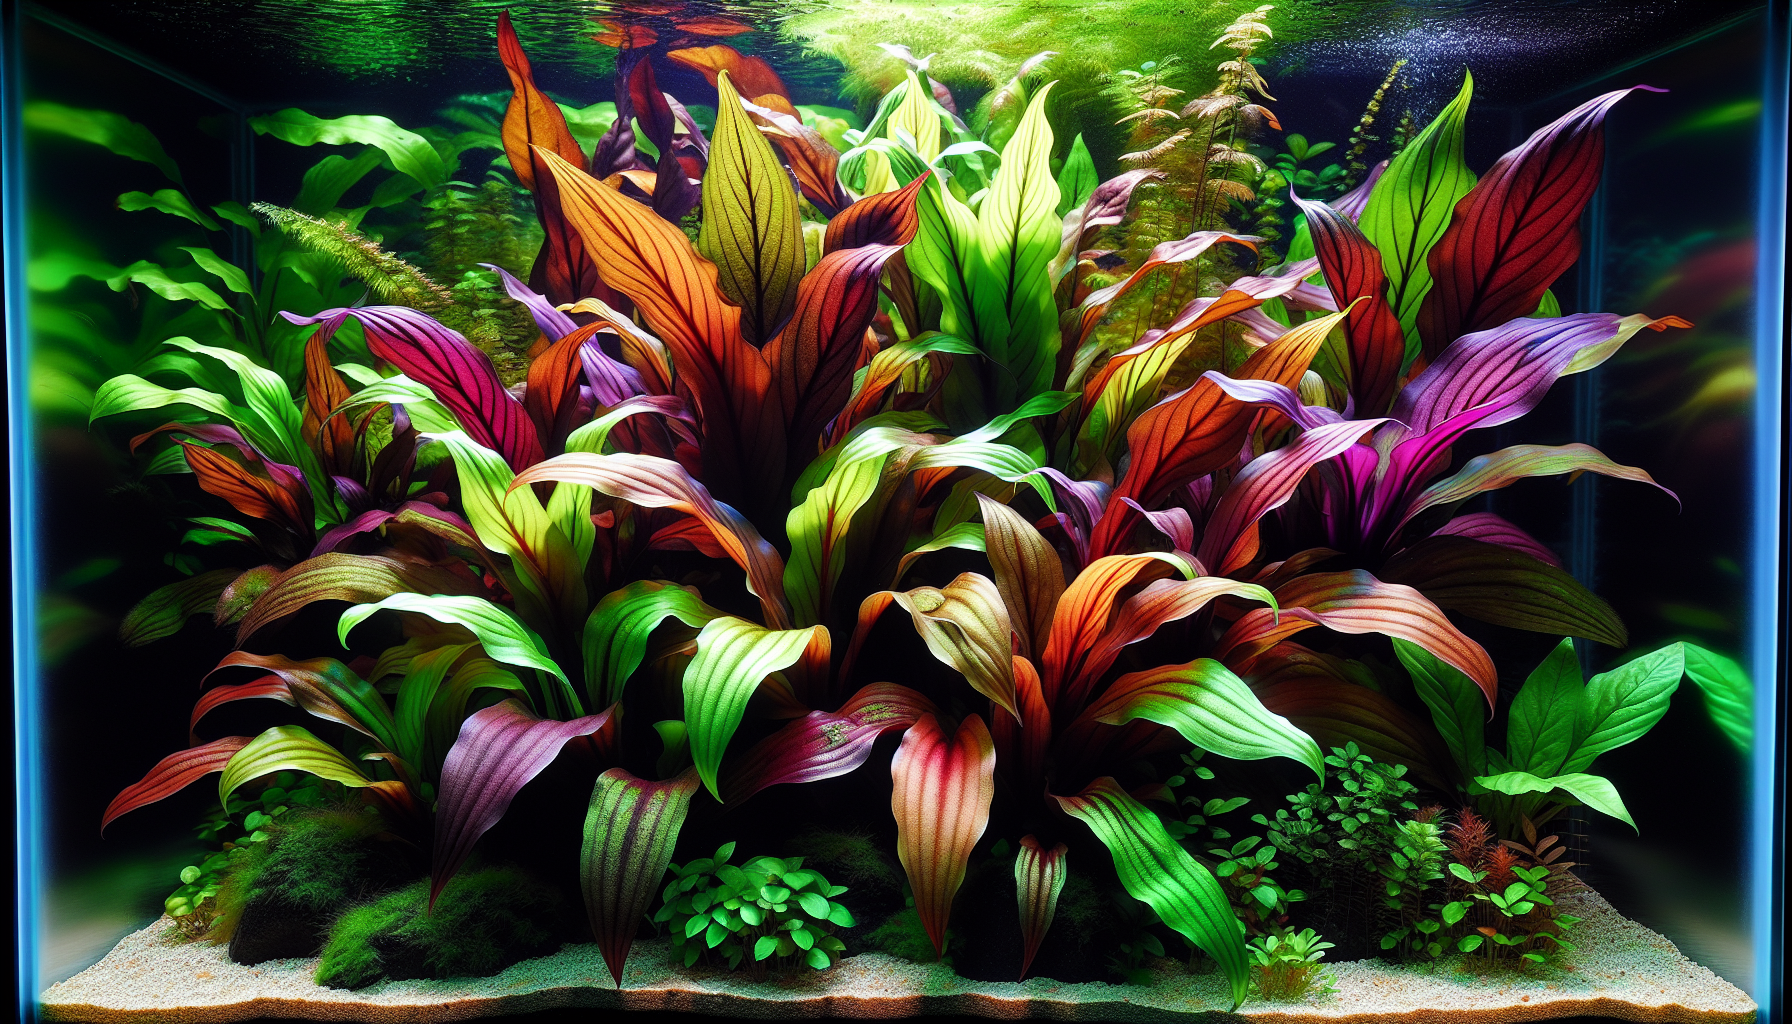 Cryptocoryne wendtii with diverse leaf shapes and colors